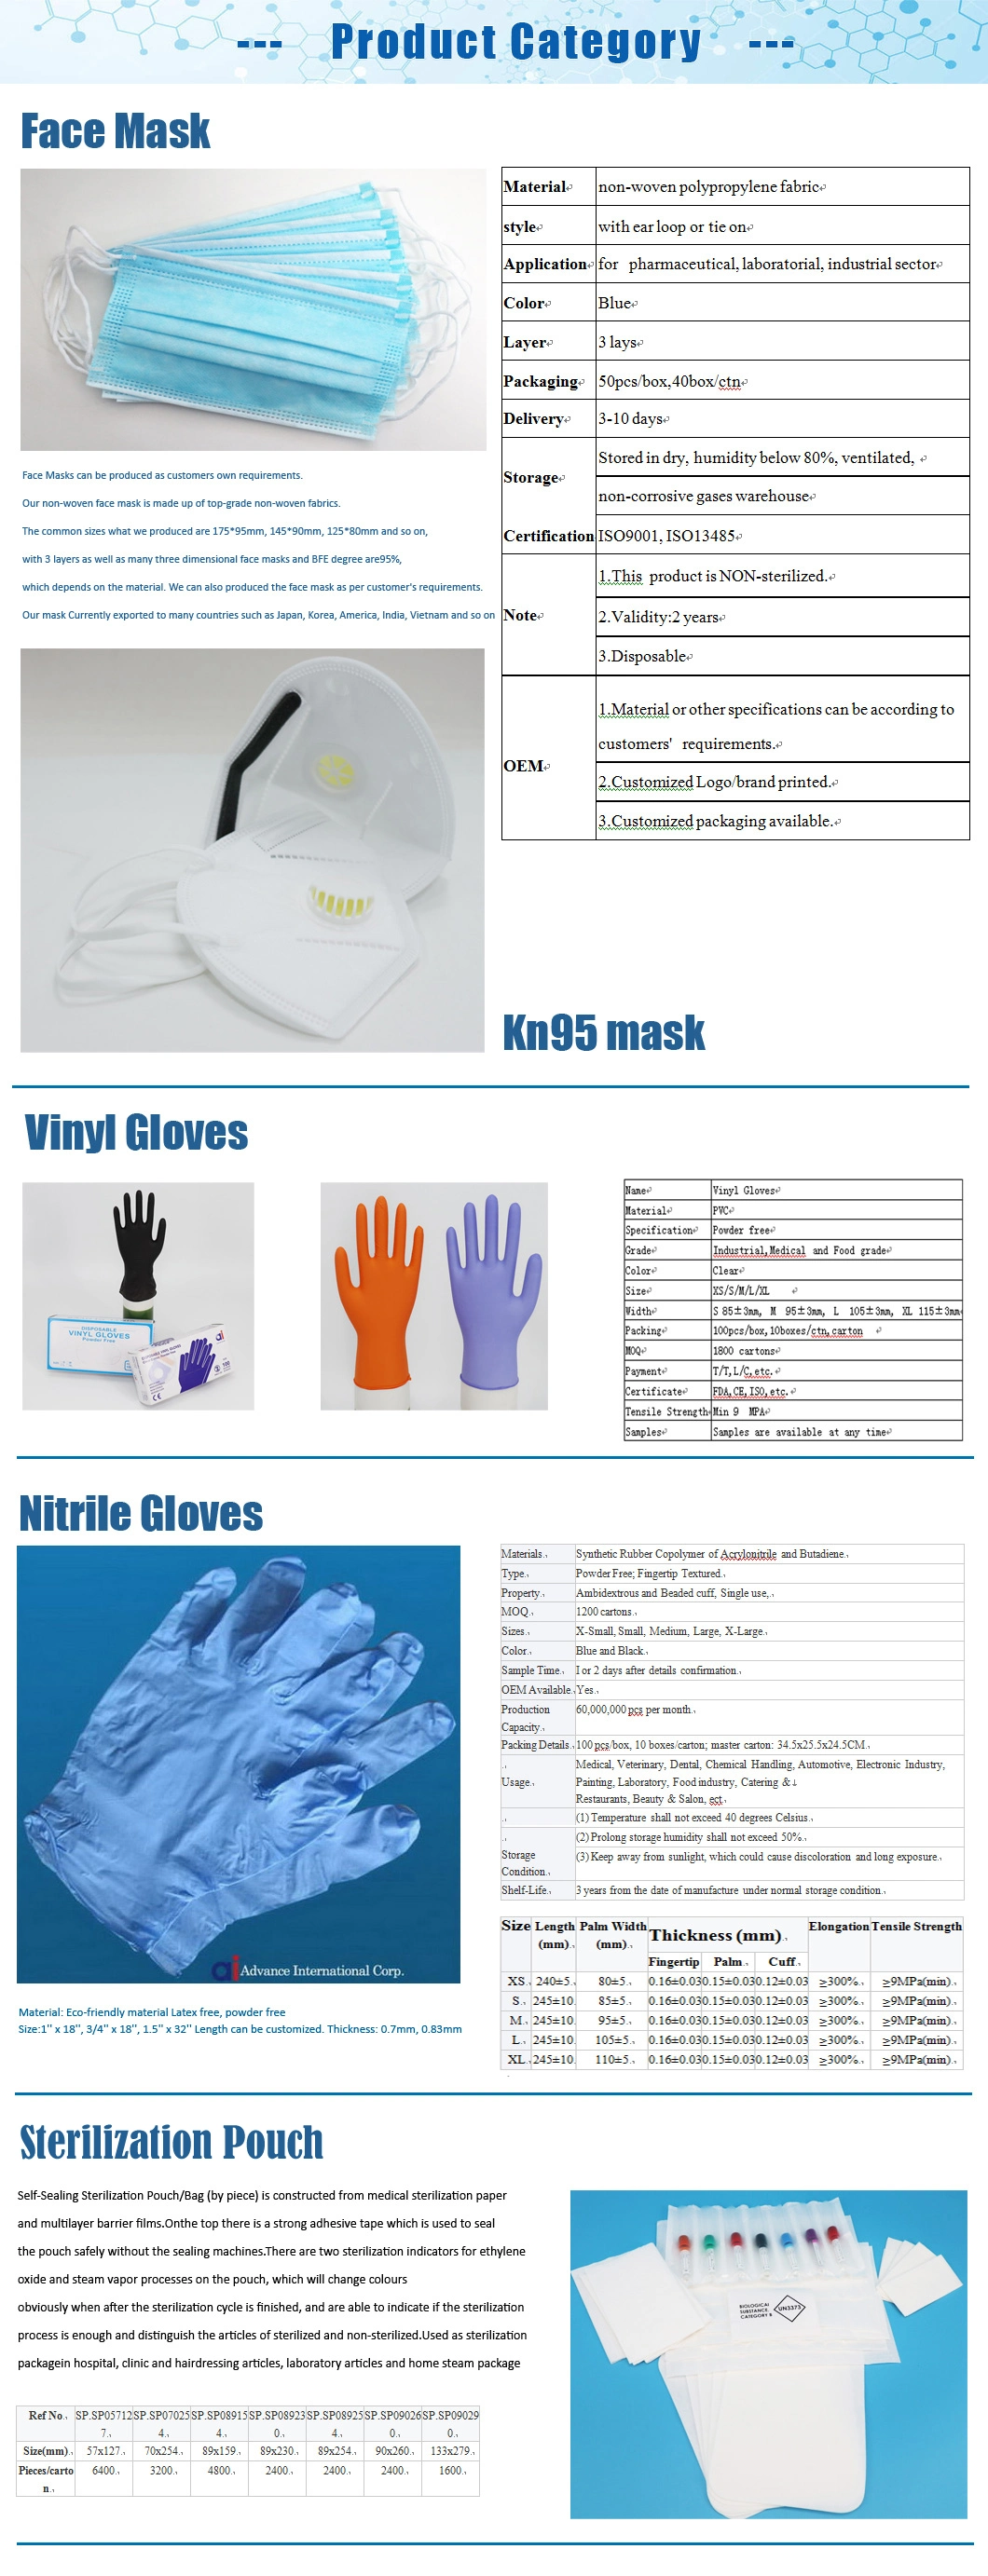 12inch Disposable Powdered /Powder Free Vinyl Gloves for Food Industry